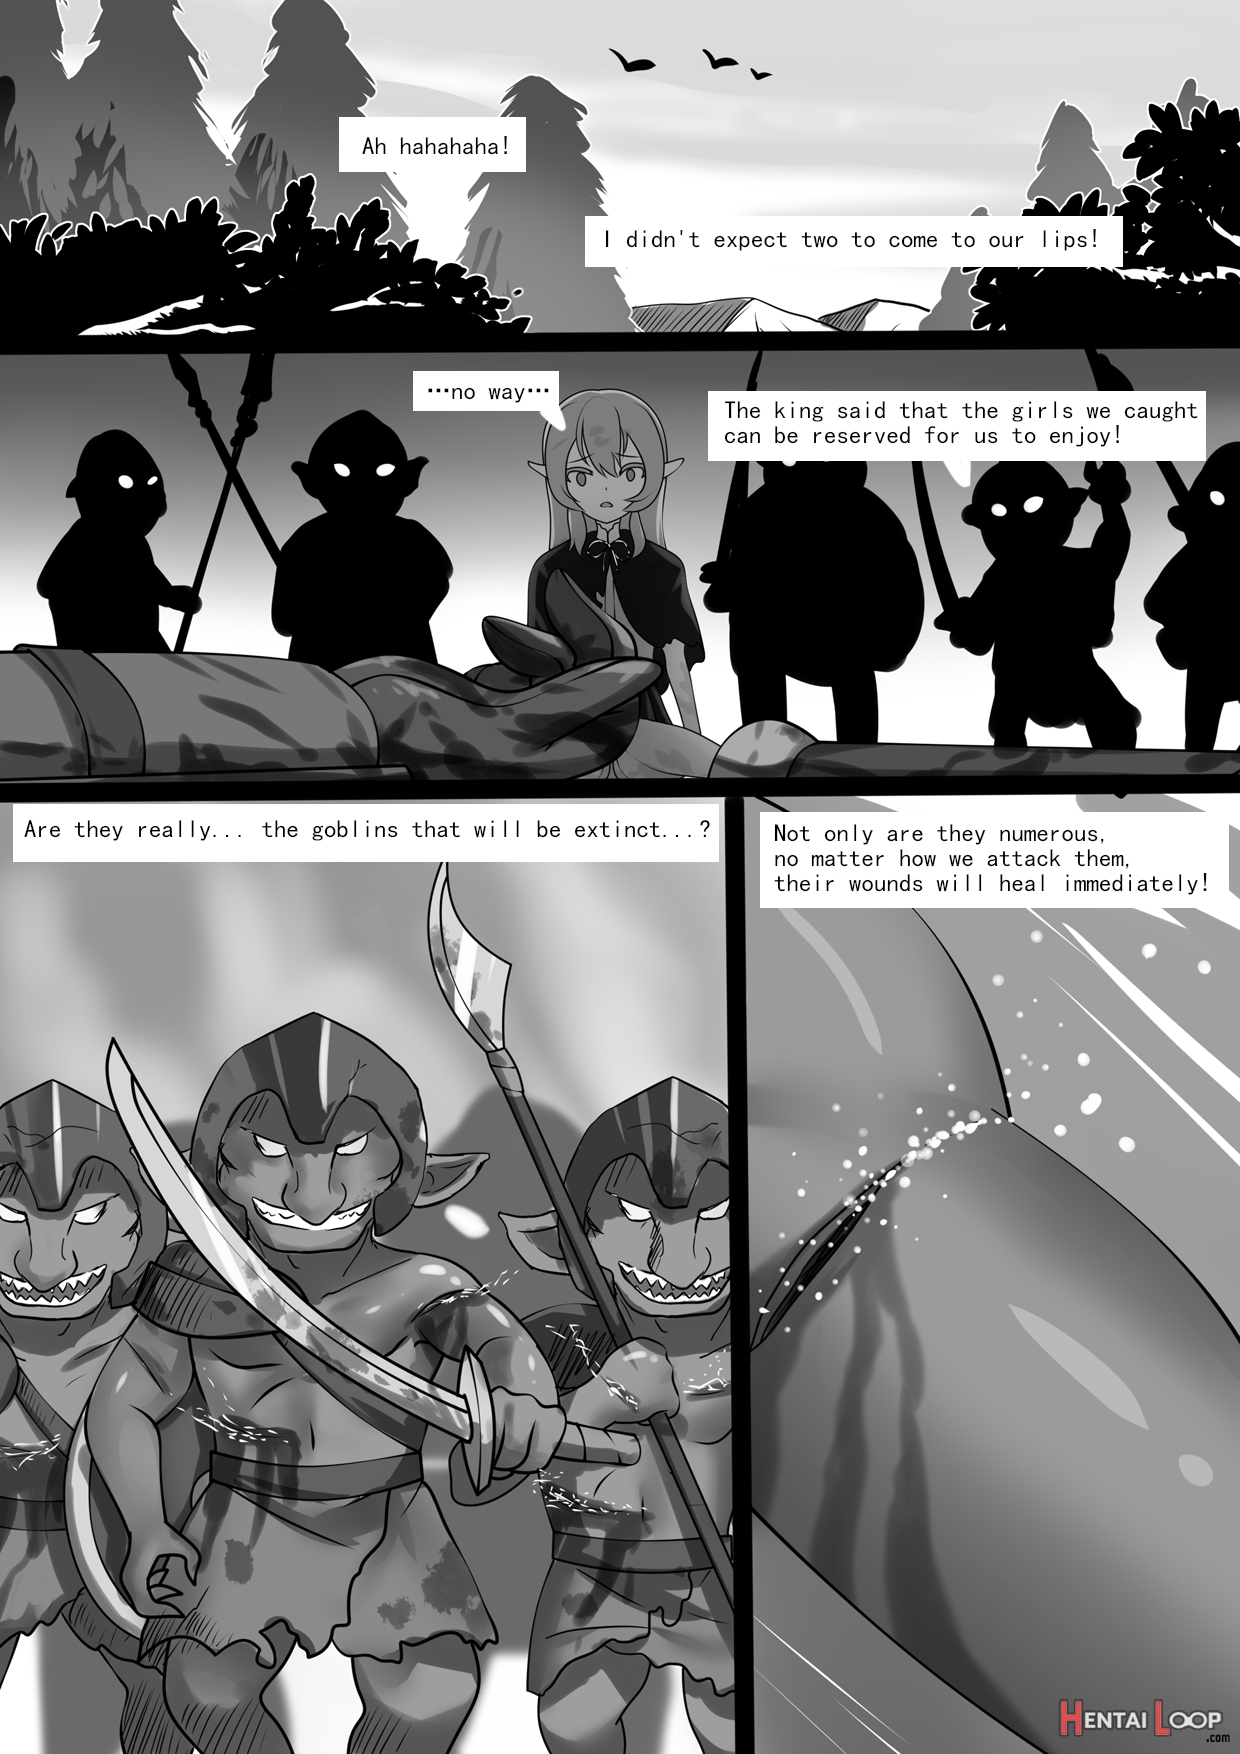 Counterattack Of Orcs 2 page 4